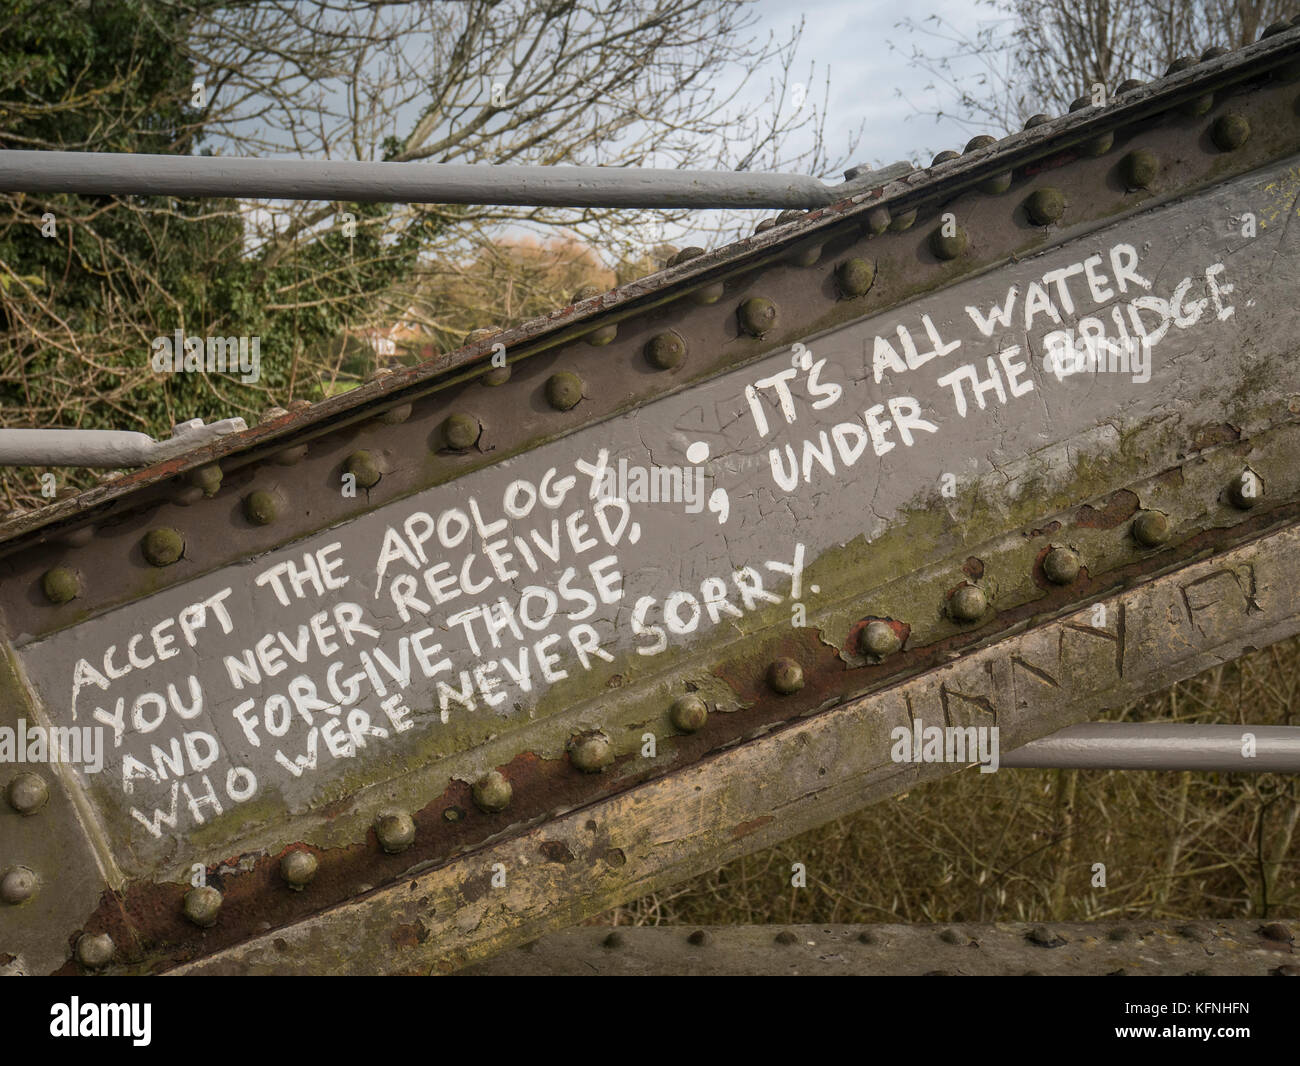 Accept the apology you never received, and forgive those who were never sorry; it's all water under the bridge. Stock Photo